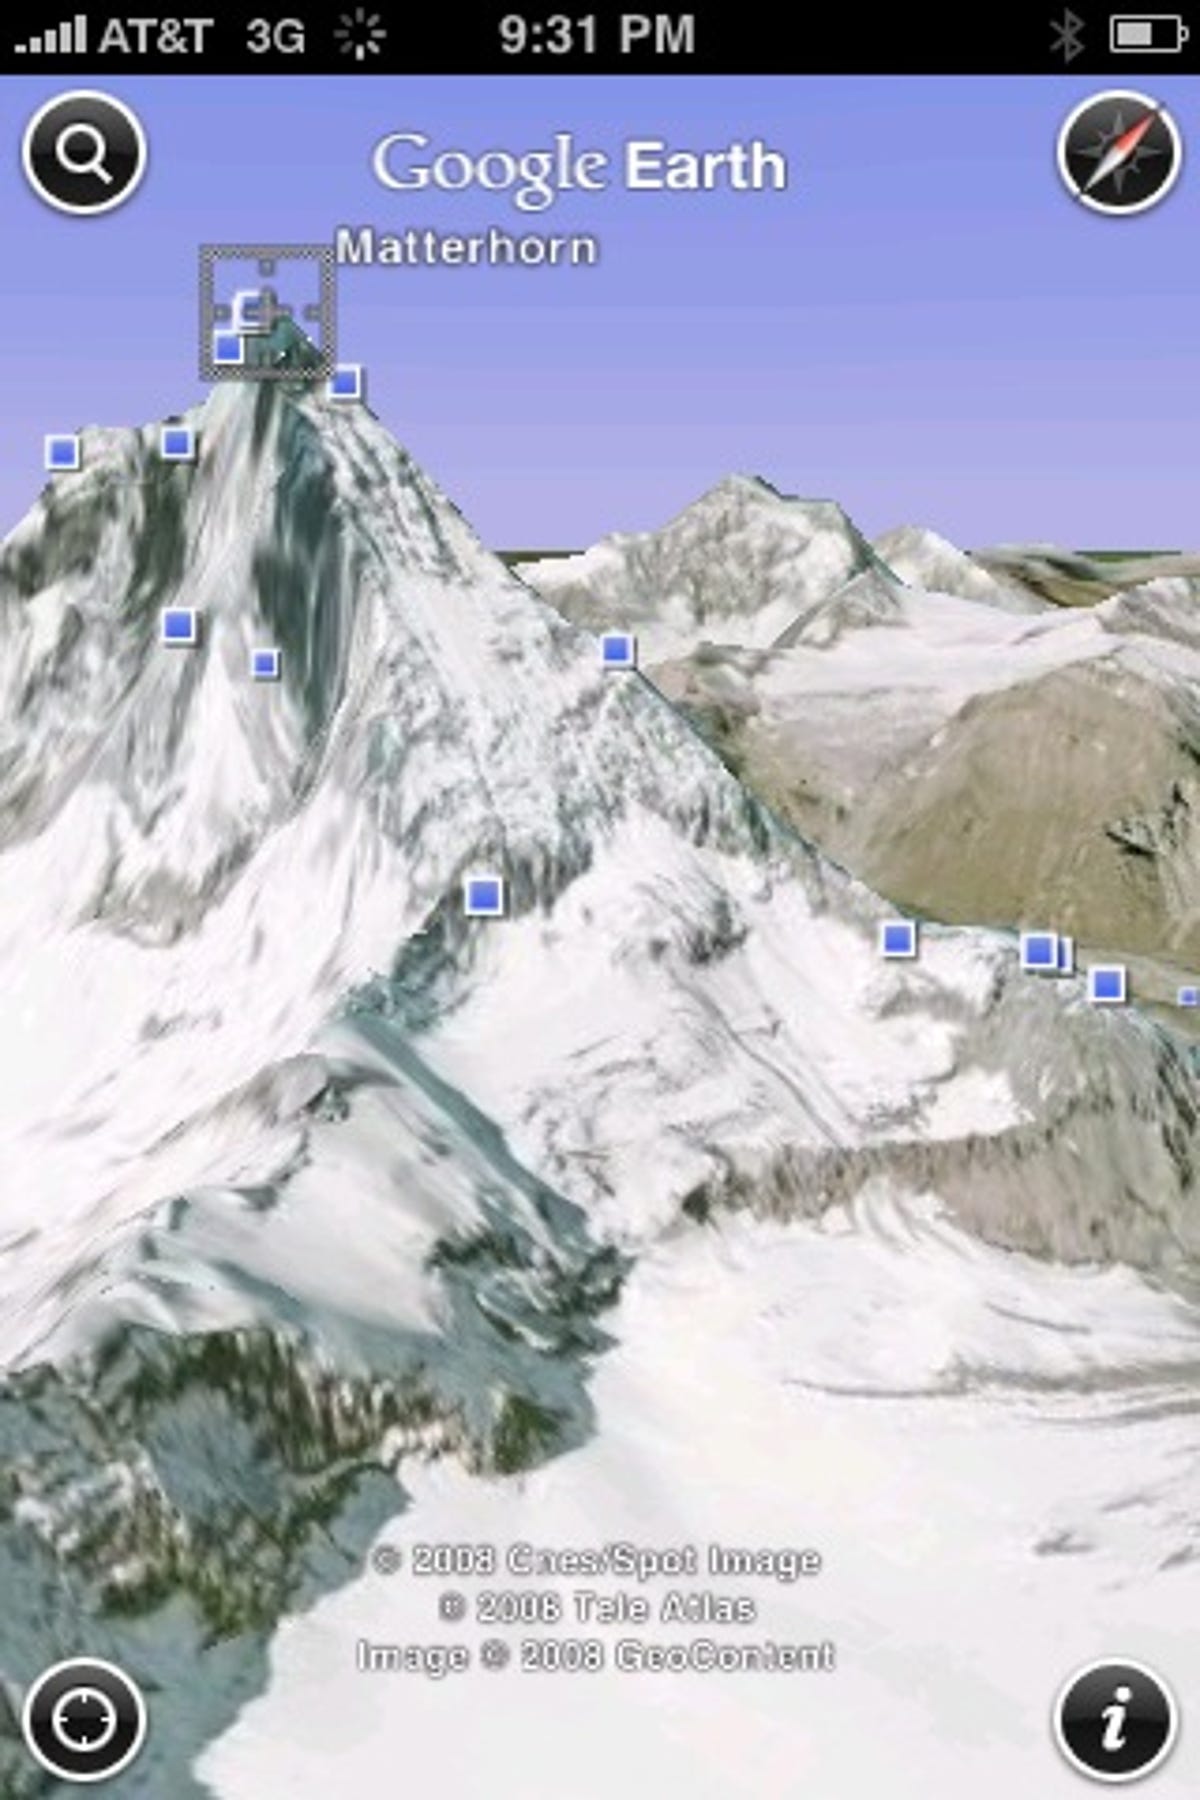 Google Earth for the iPhone can show satellite views of the world in 3D, in this case the Matterhorn, and dots the display with blue squares showing geotagged Panoramio photos.